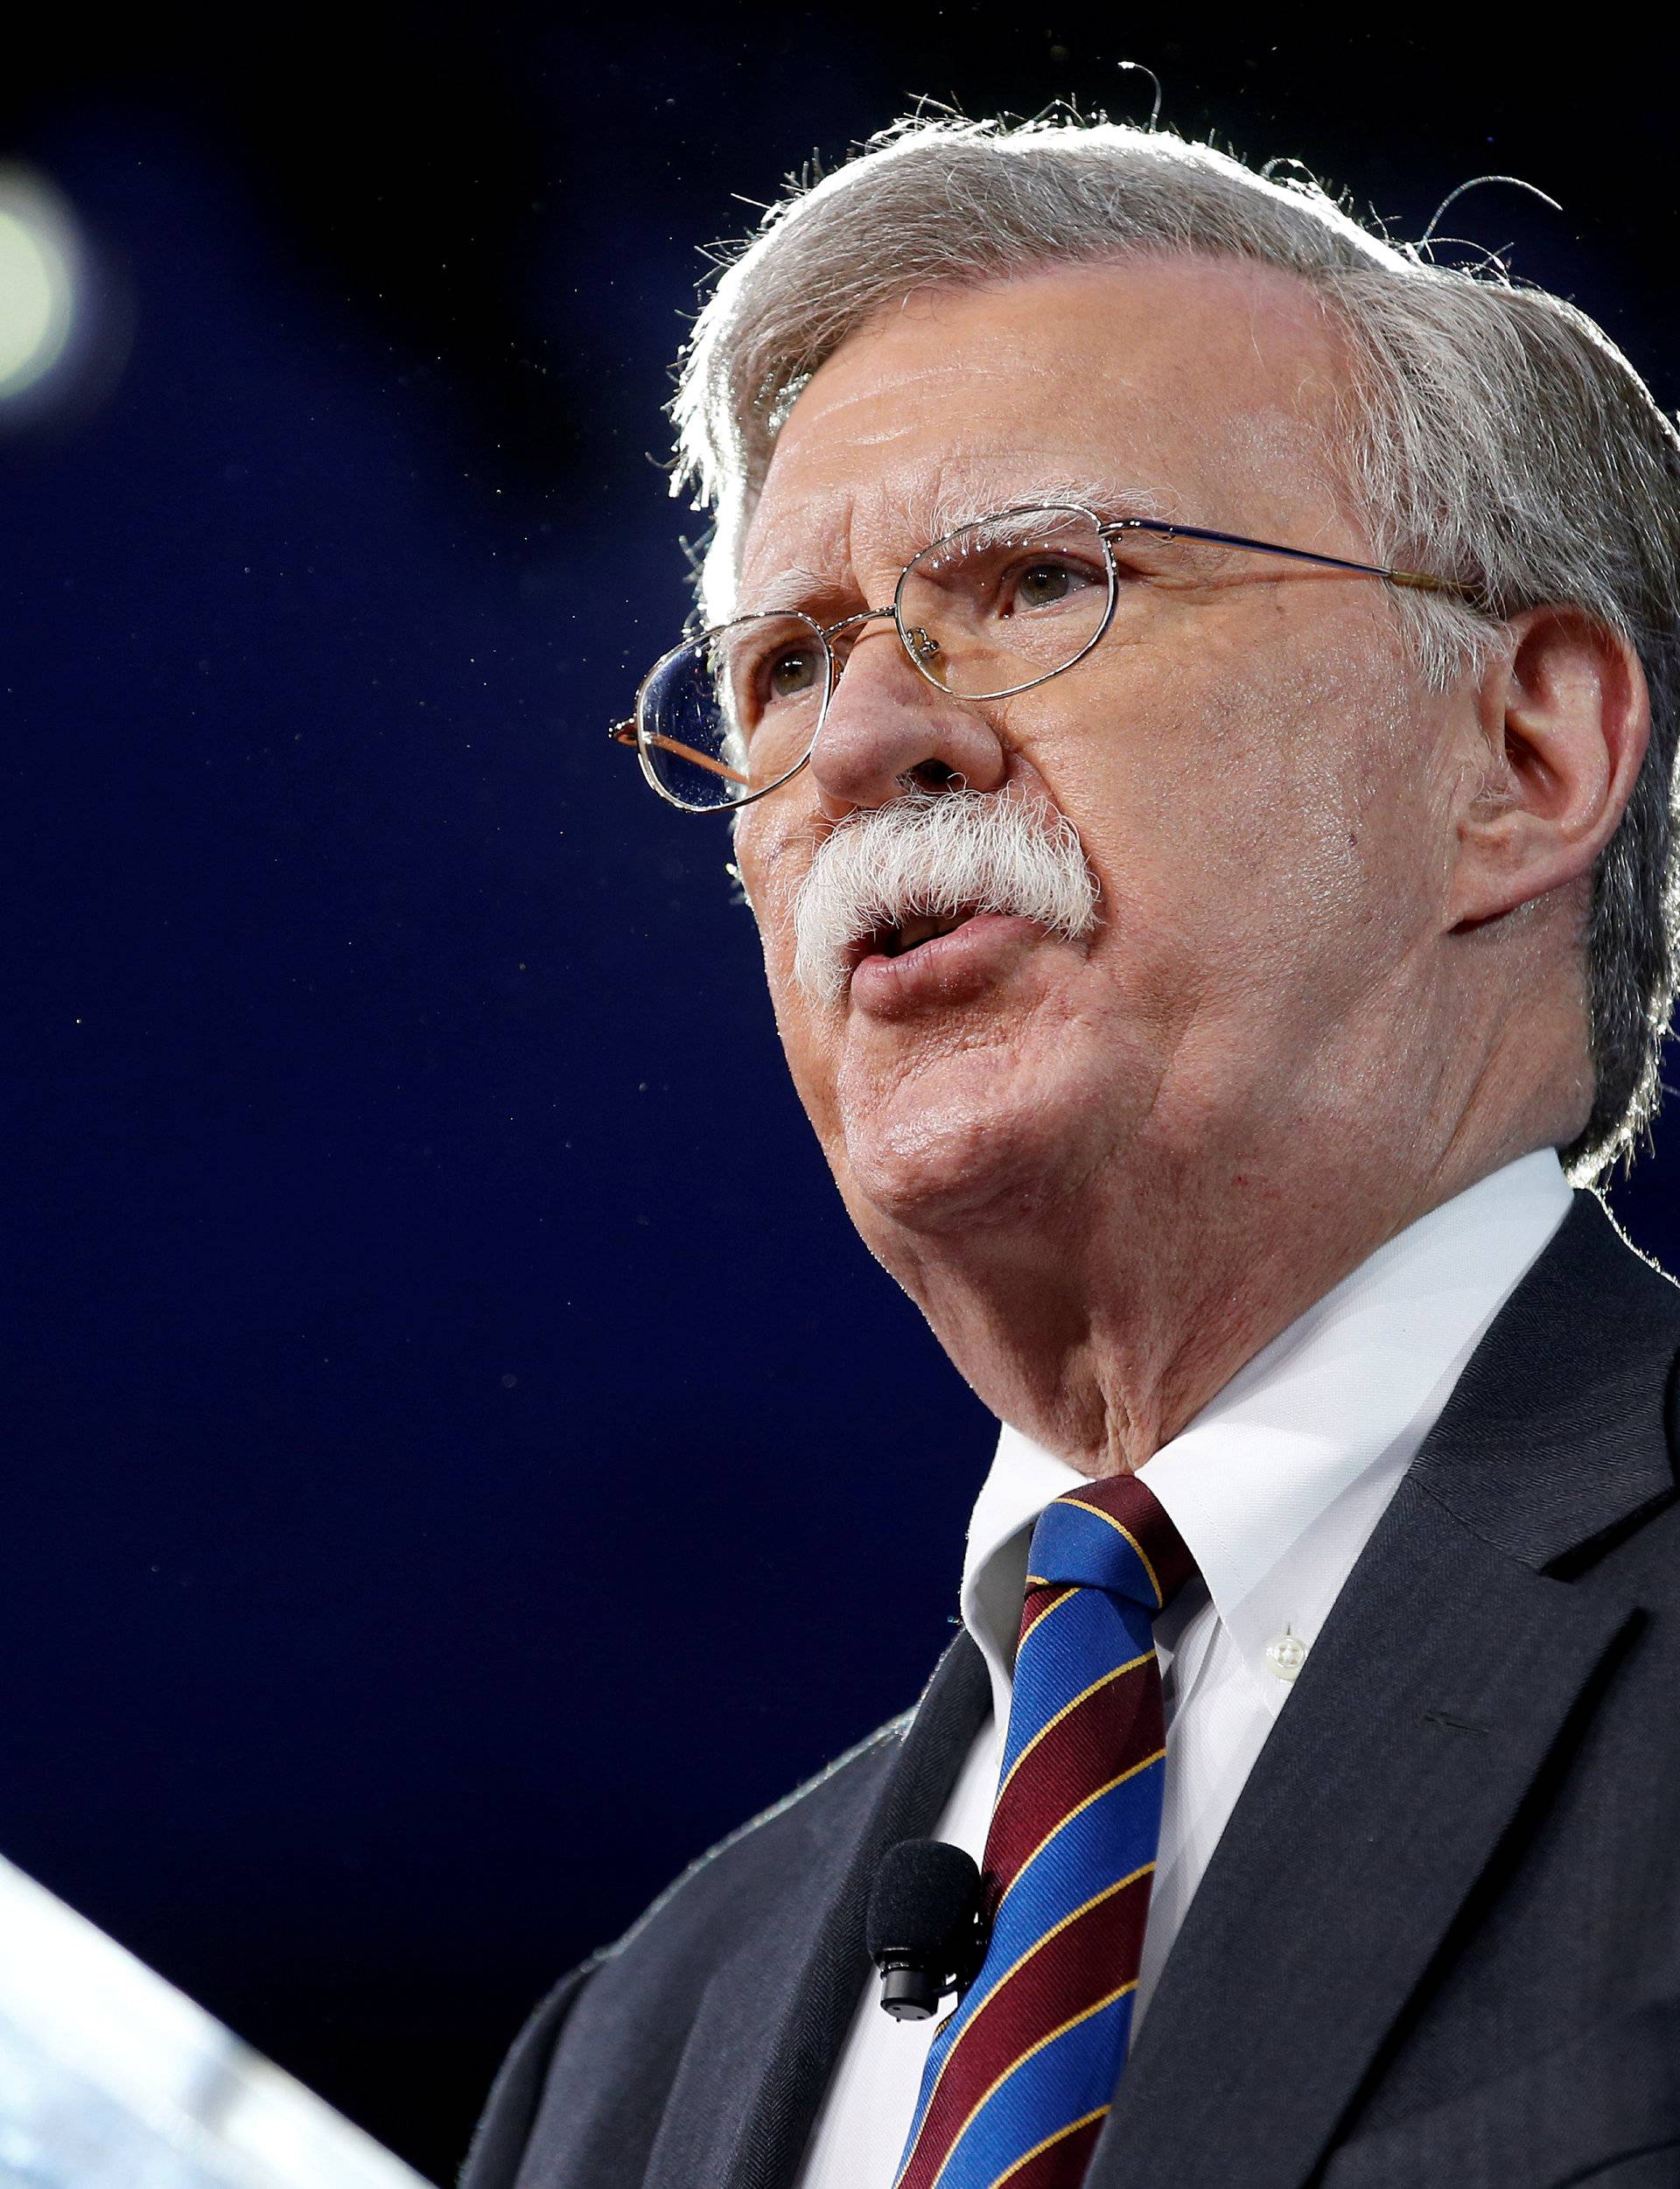 FILE PHOTO: Former U.S. Ambassador to the United Nations John Bolton speaks at the Conservative Political Action Conference (CPAC) in Oxon Hill, Maryland